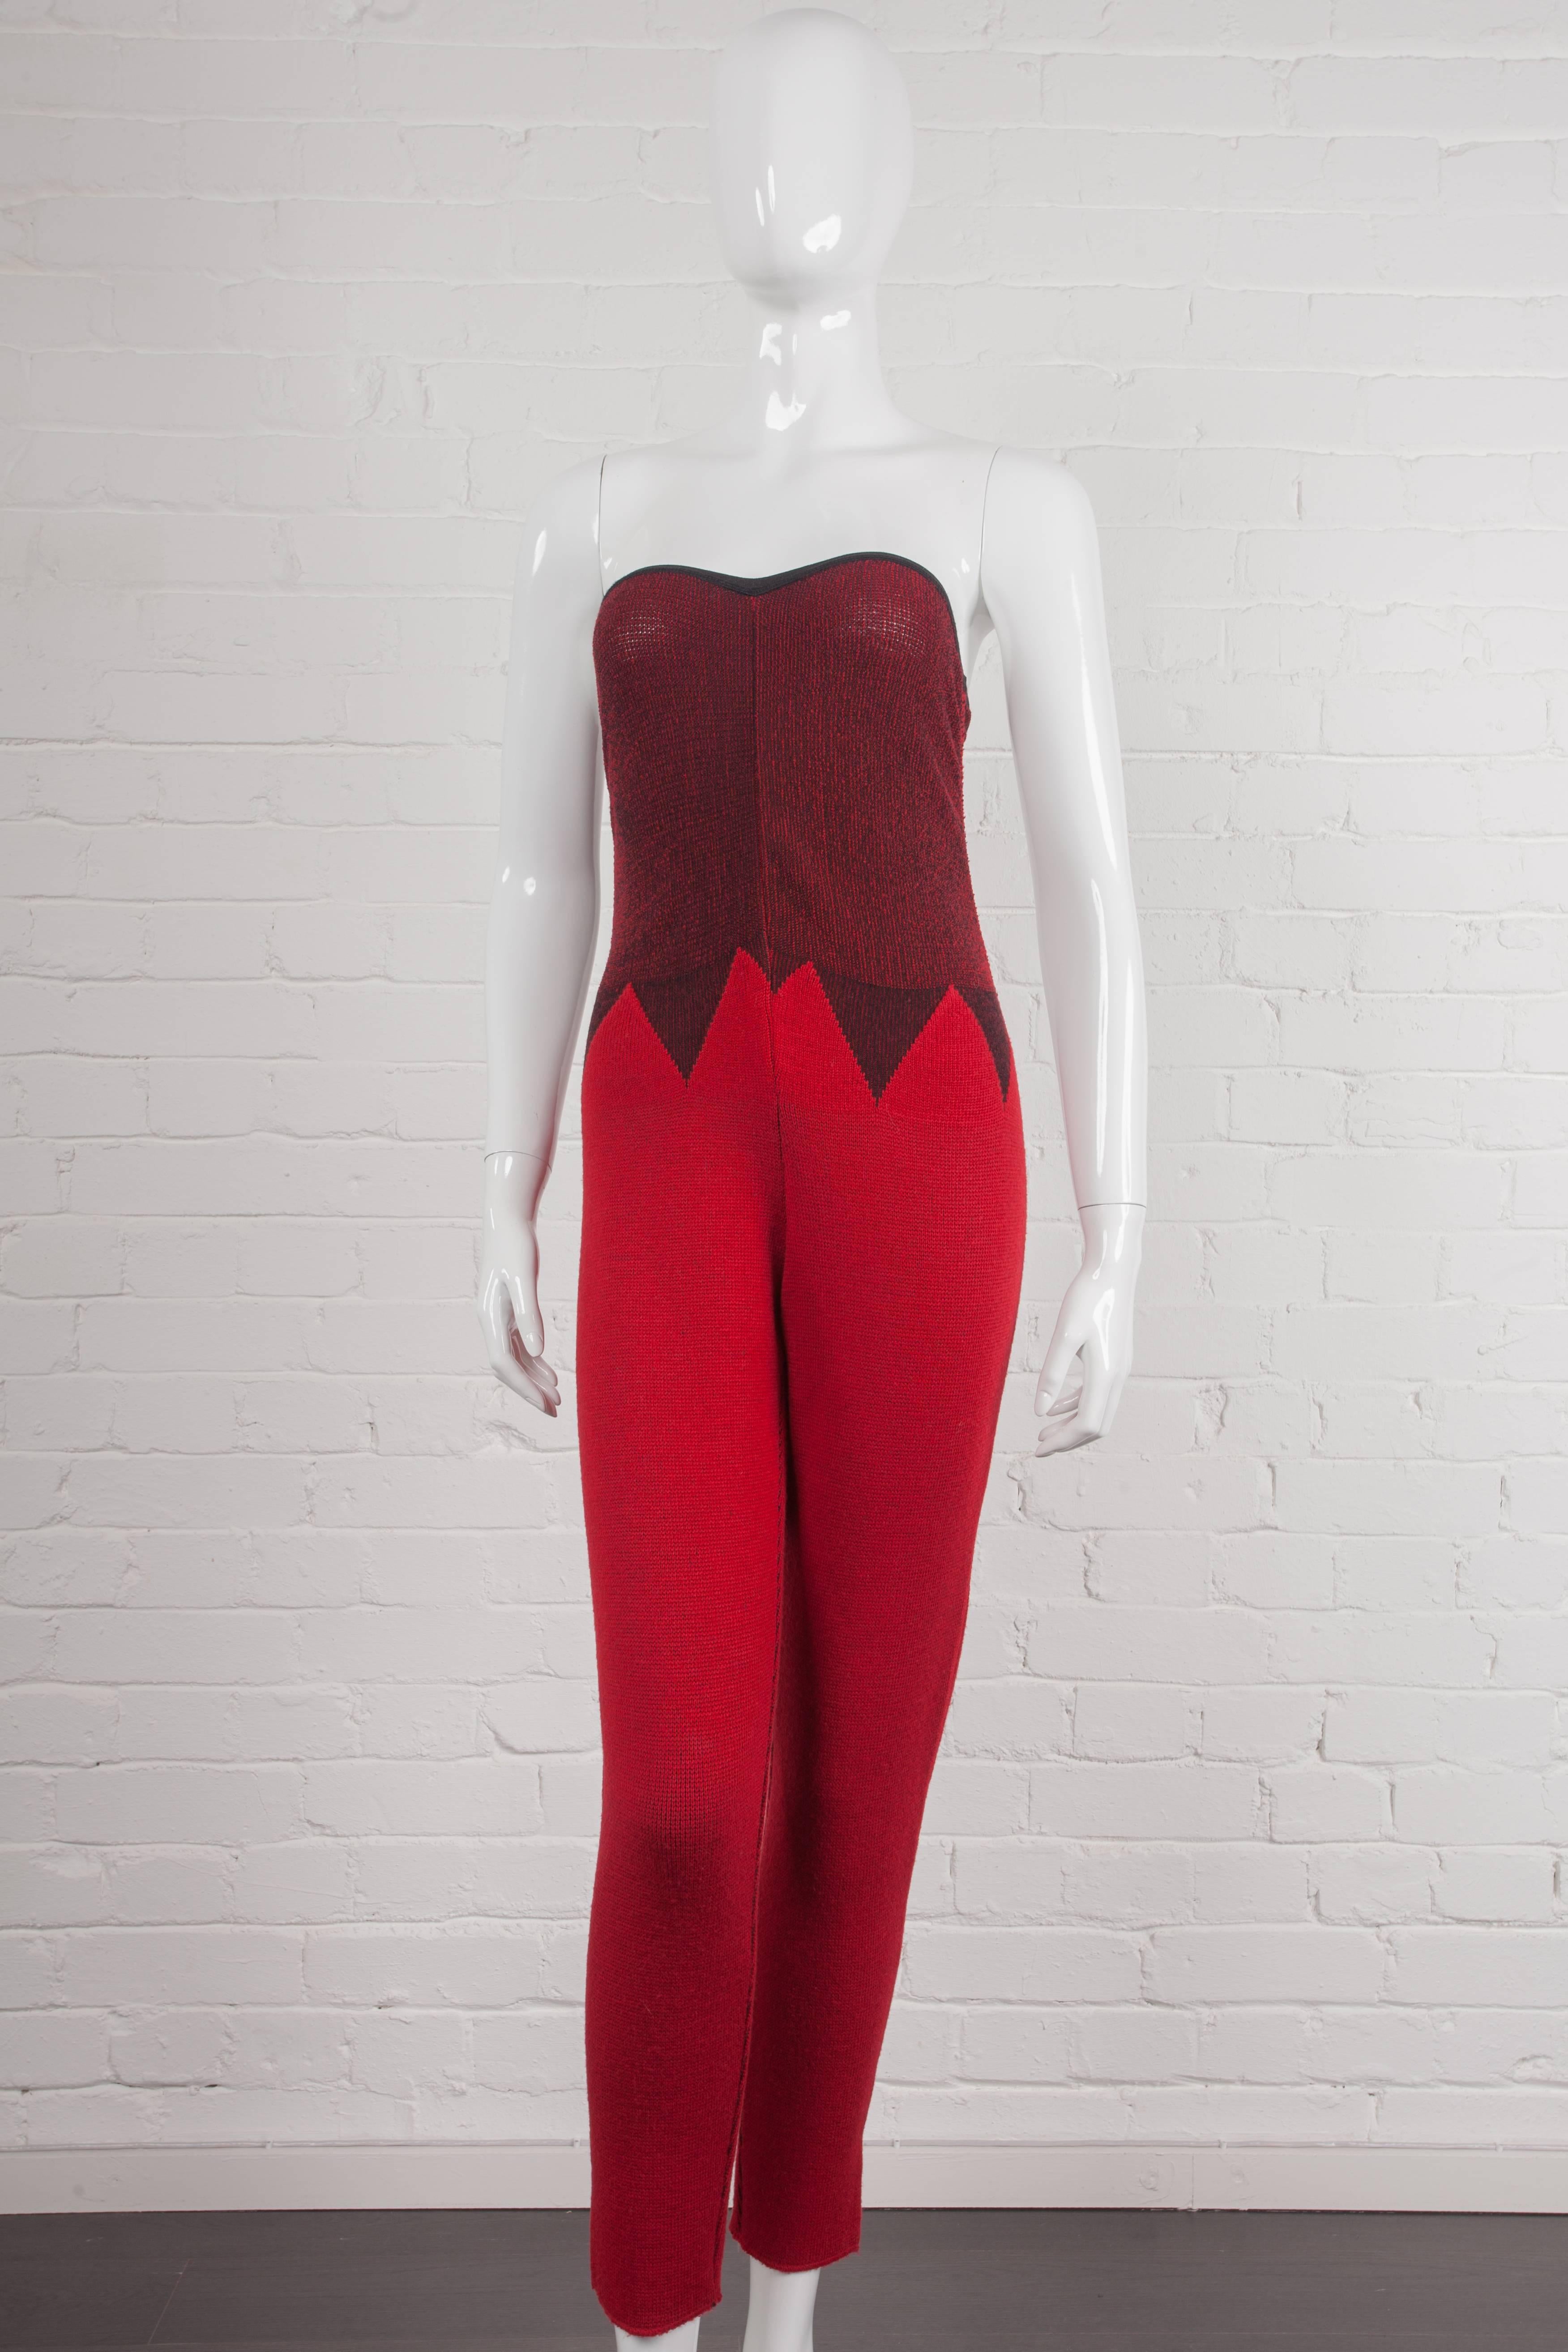 Jean Paul Gaultier 1987/88 “Forbidden Gaultier” high waisted trousers In New Condition For Sale In London, GB